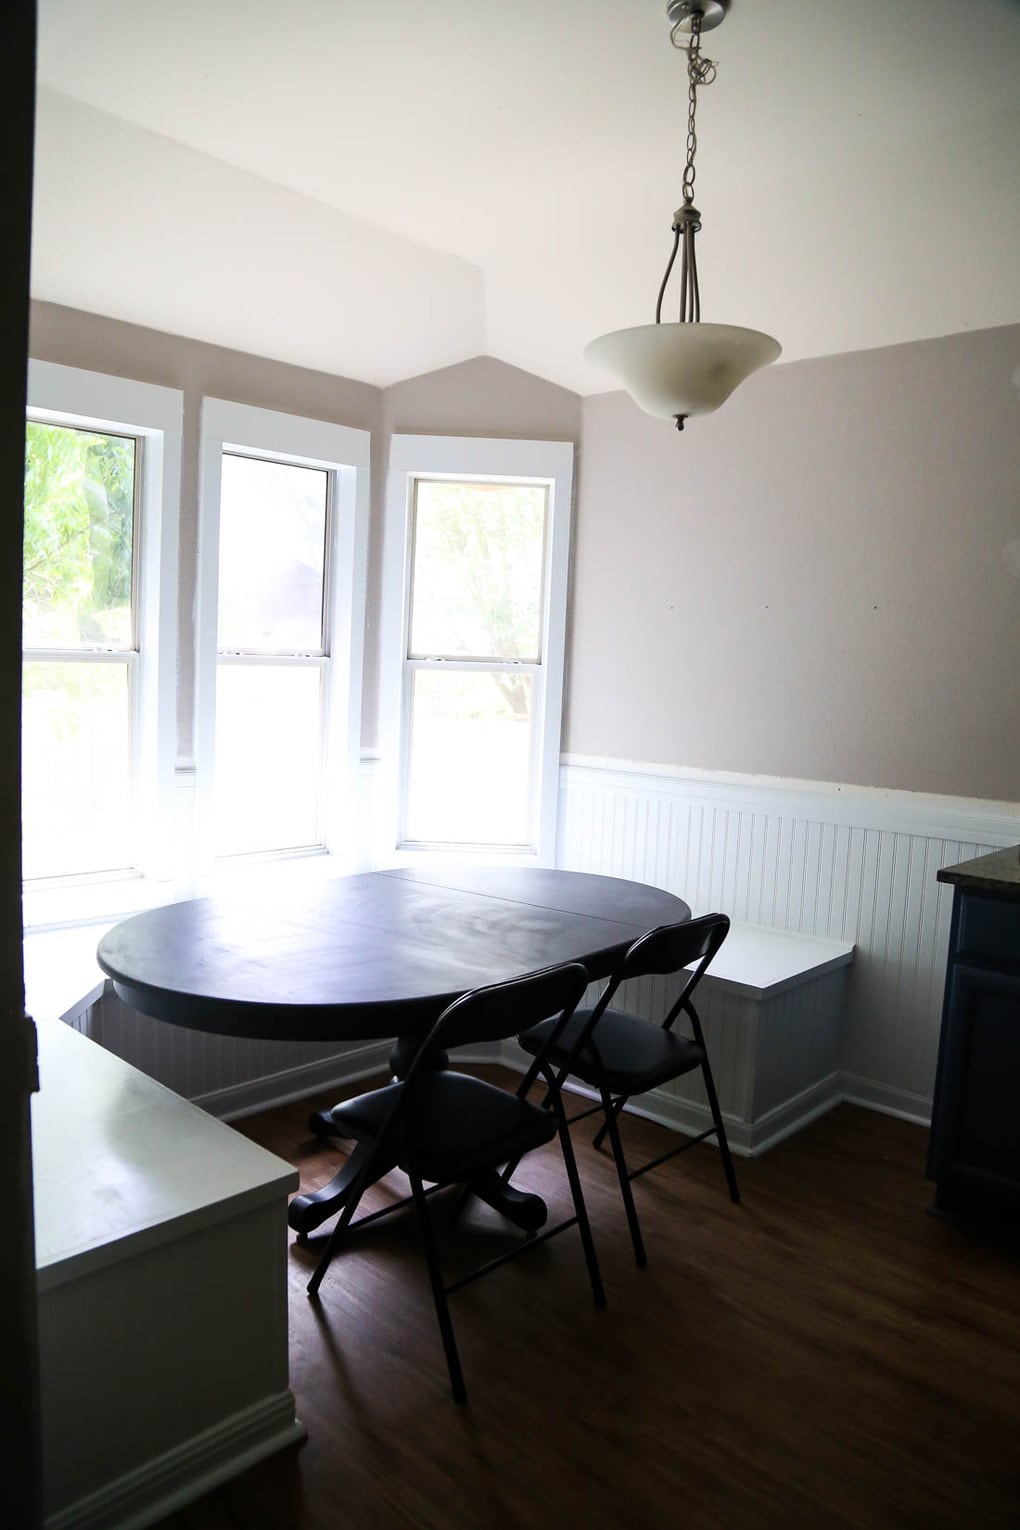 Banquette and beadboard in dining room